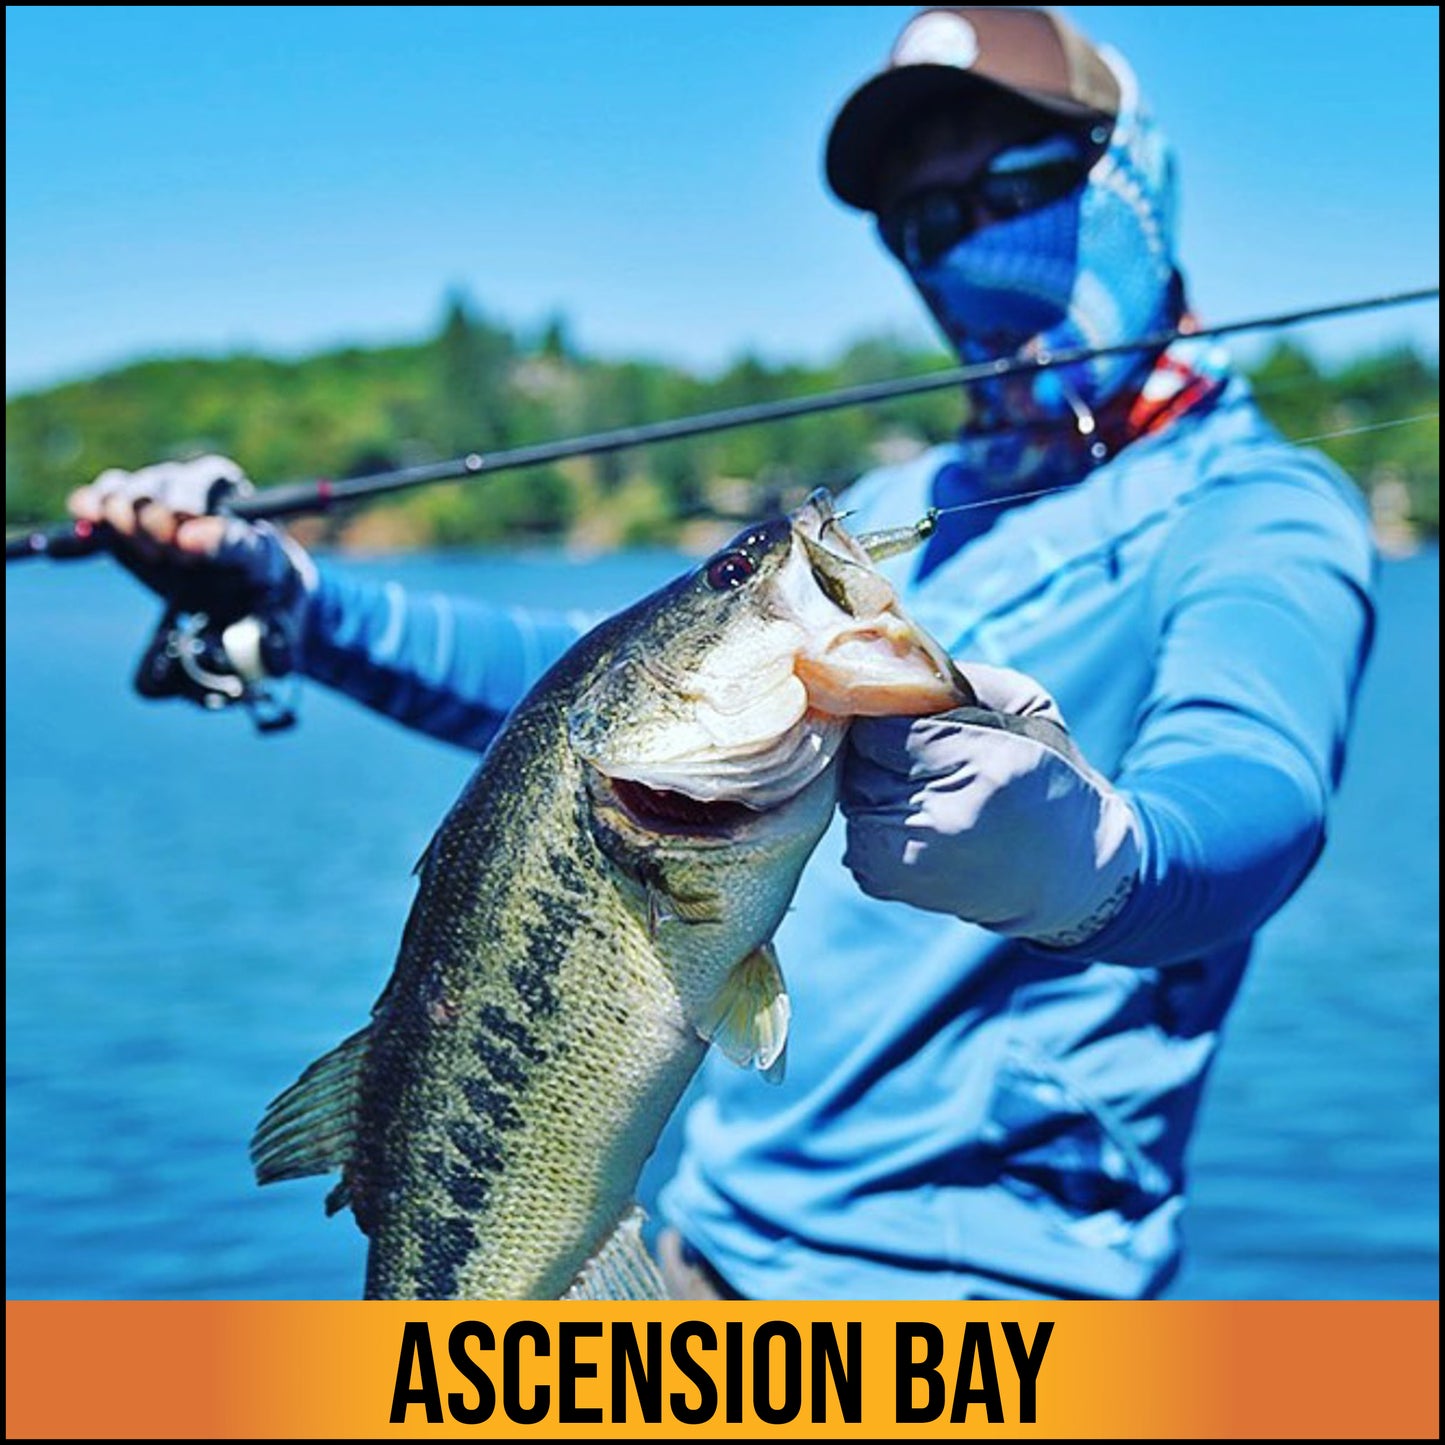 The Ascension Bay Sun Glove is a popular model in our sun protection line. Independently tested and verified, it is rated at the maximum protection of UPF 50+. Providing both hand and wrist protection, this glove is great for any of your outdoor adventures.